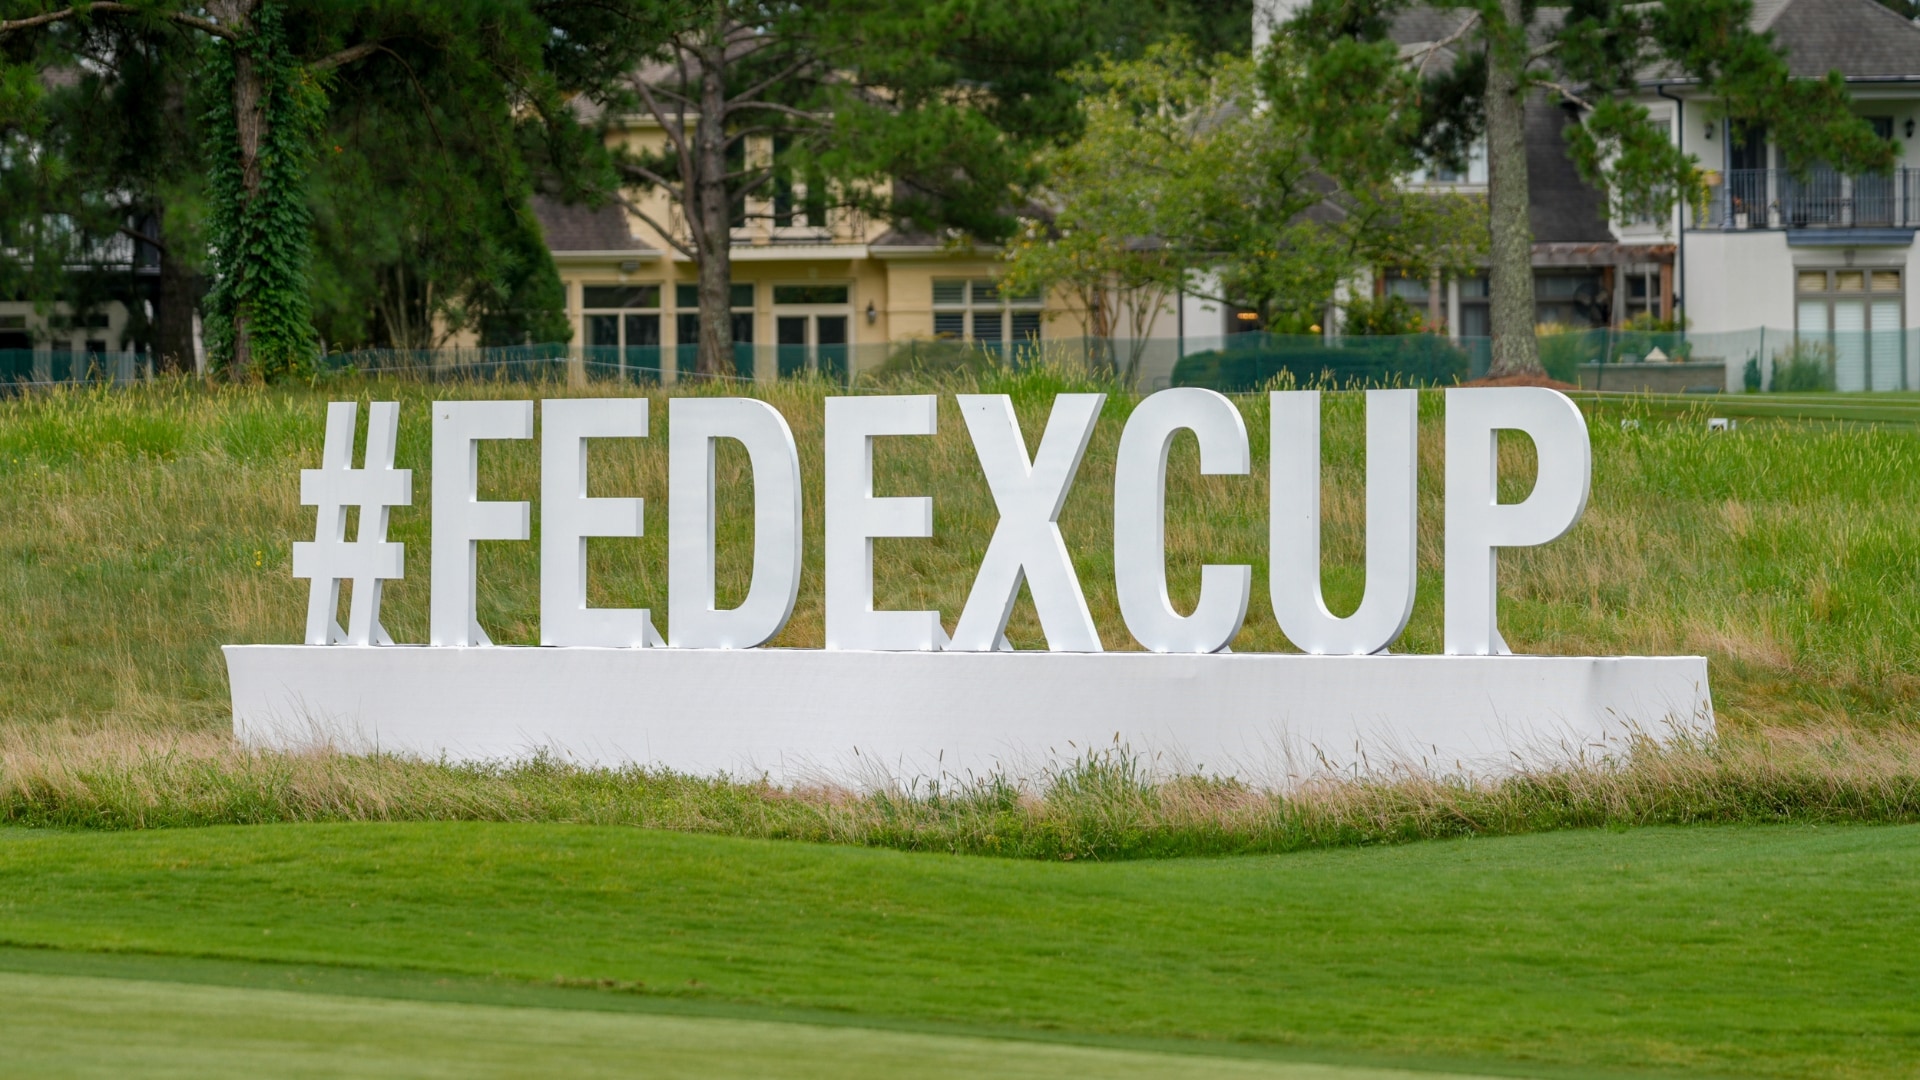 The difference between Nos. 50 and 51 in the FedExCup Playoffs? A whole season of bigger paydays and better chances.